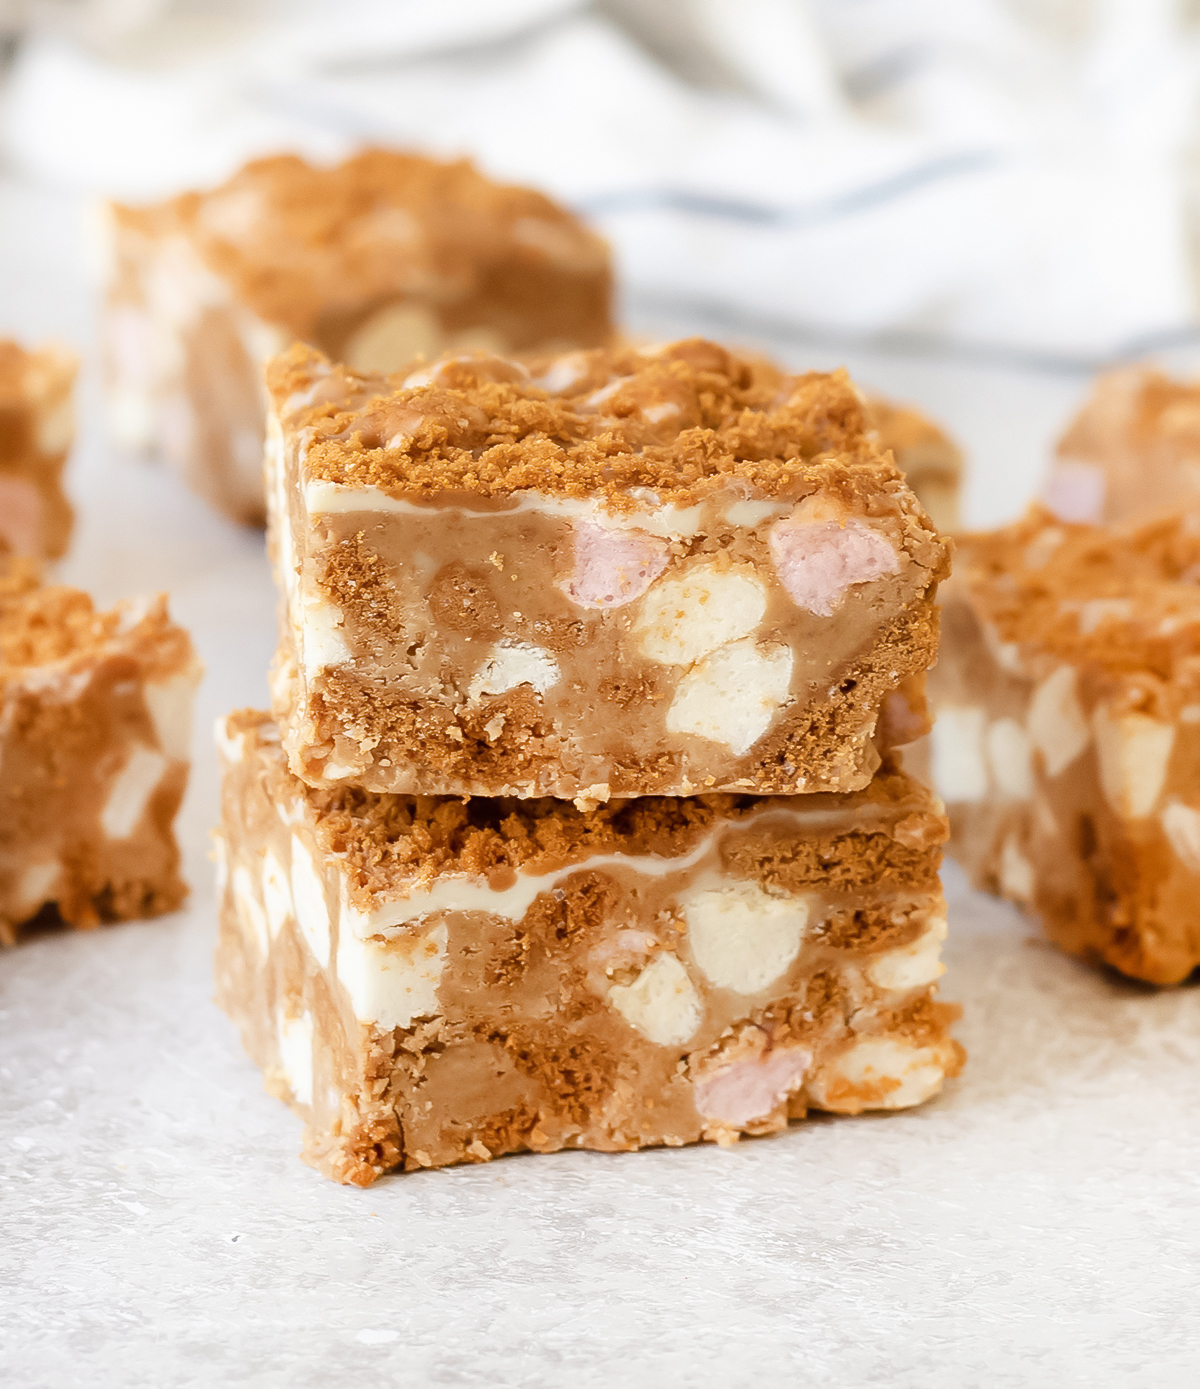 Biscoff Rocky Road is a delicious, easy, and no-bake dessert